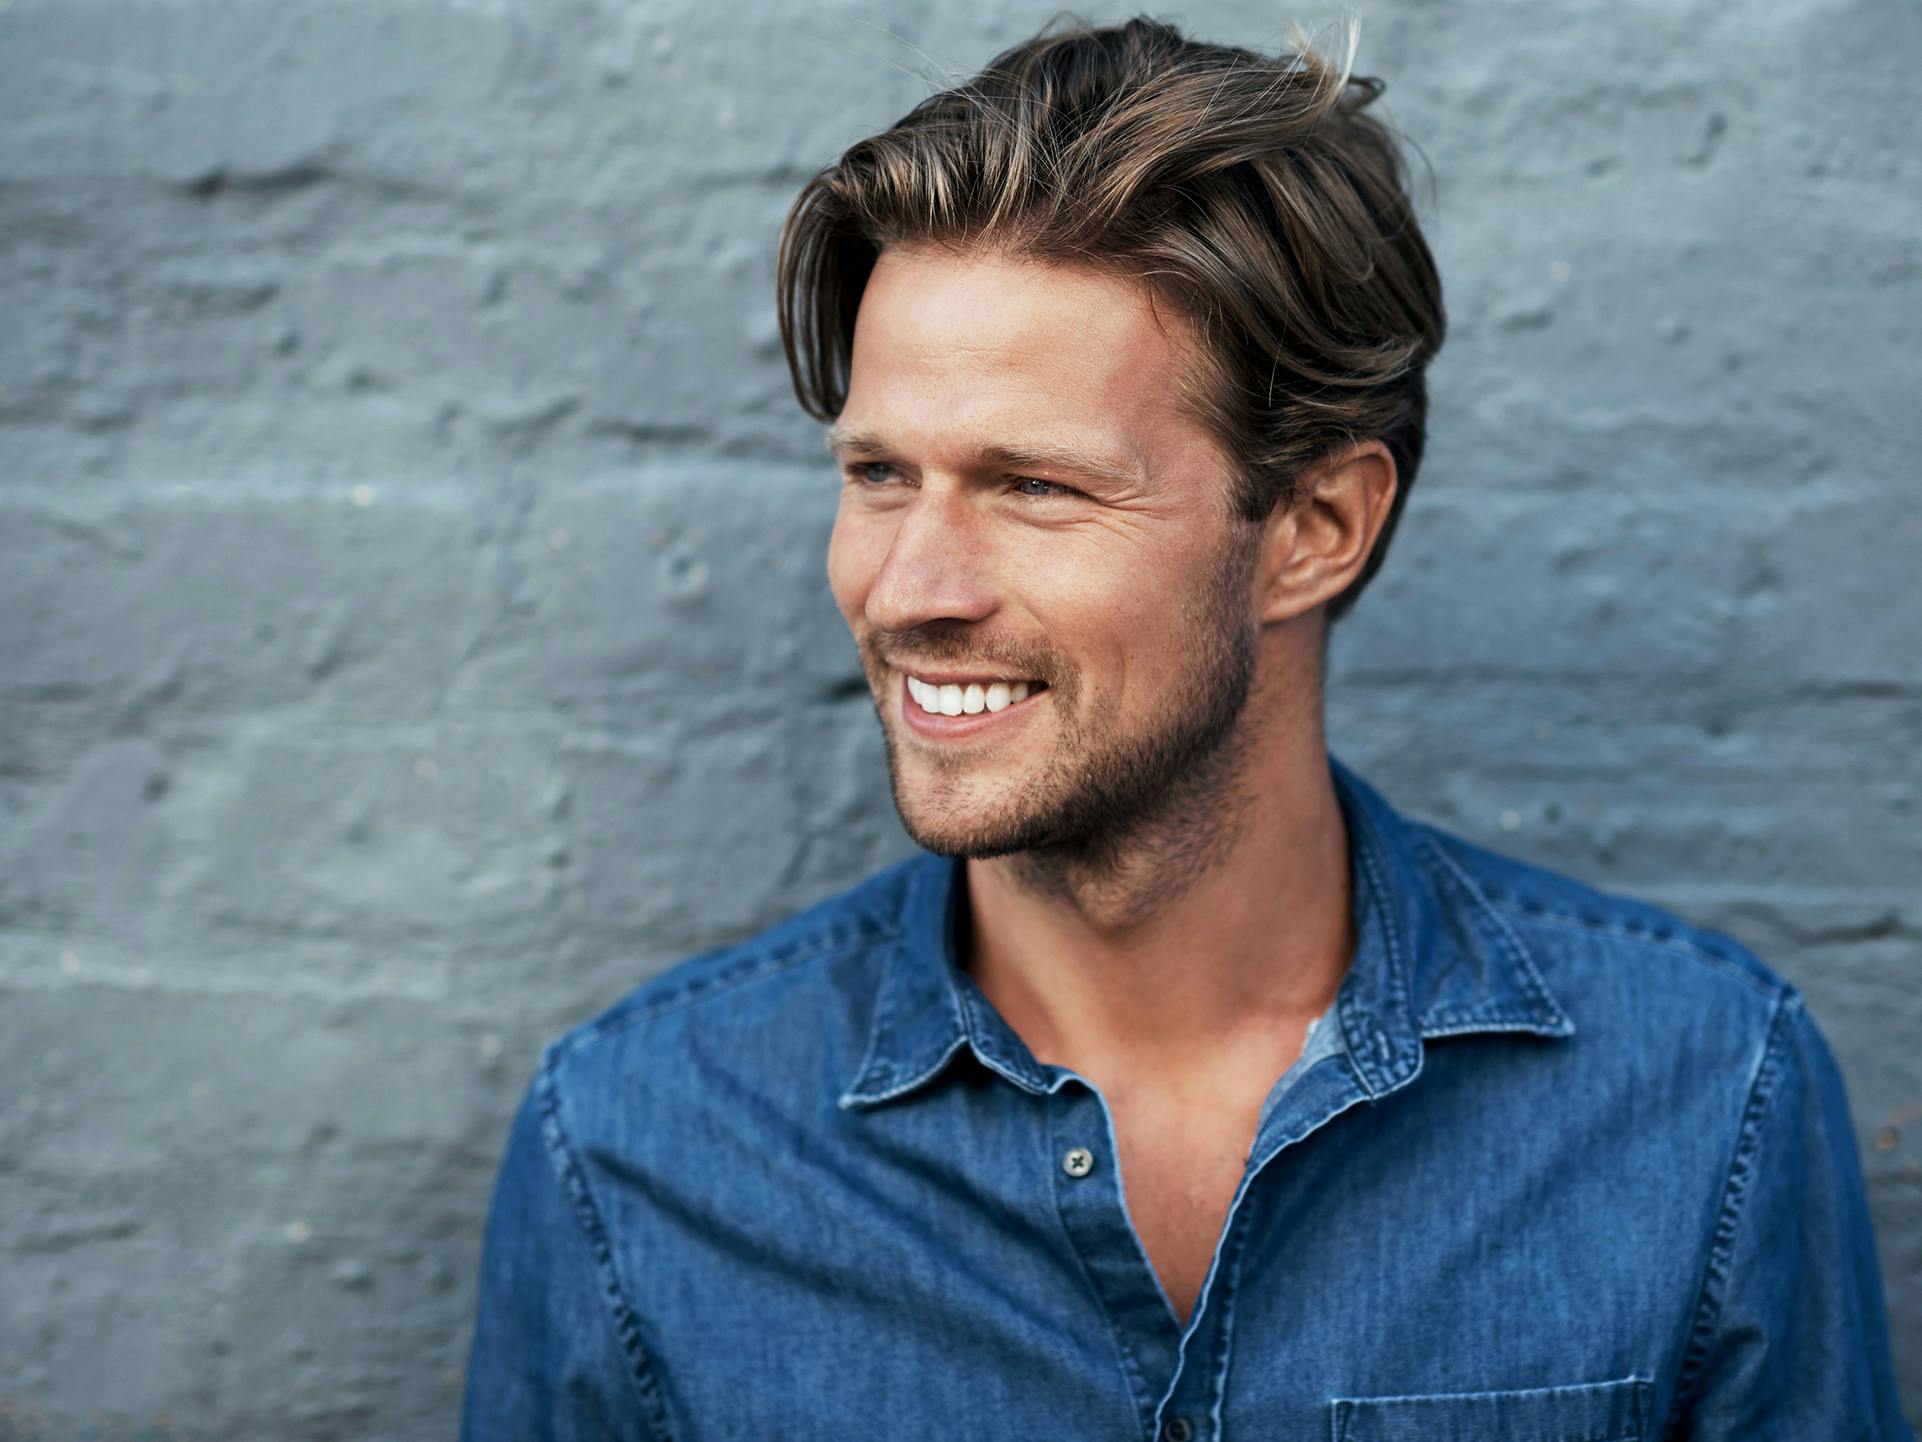 man smiling and wearing blue